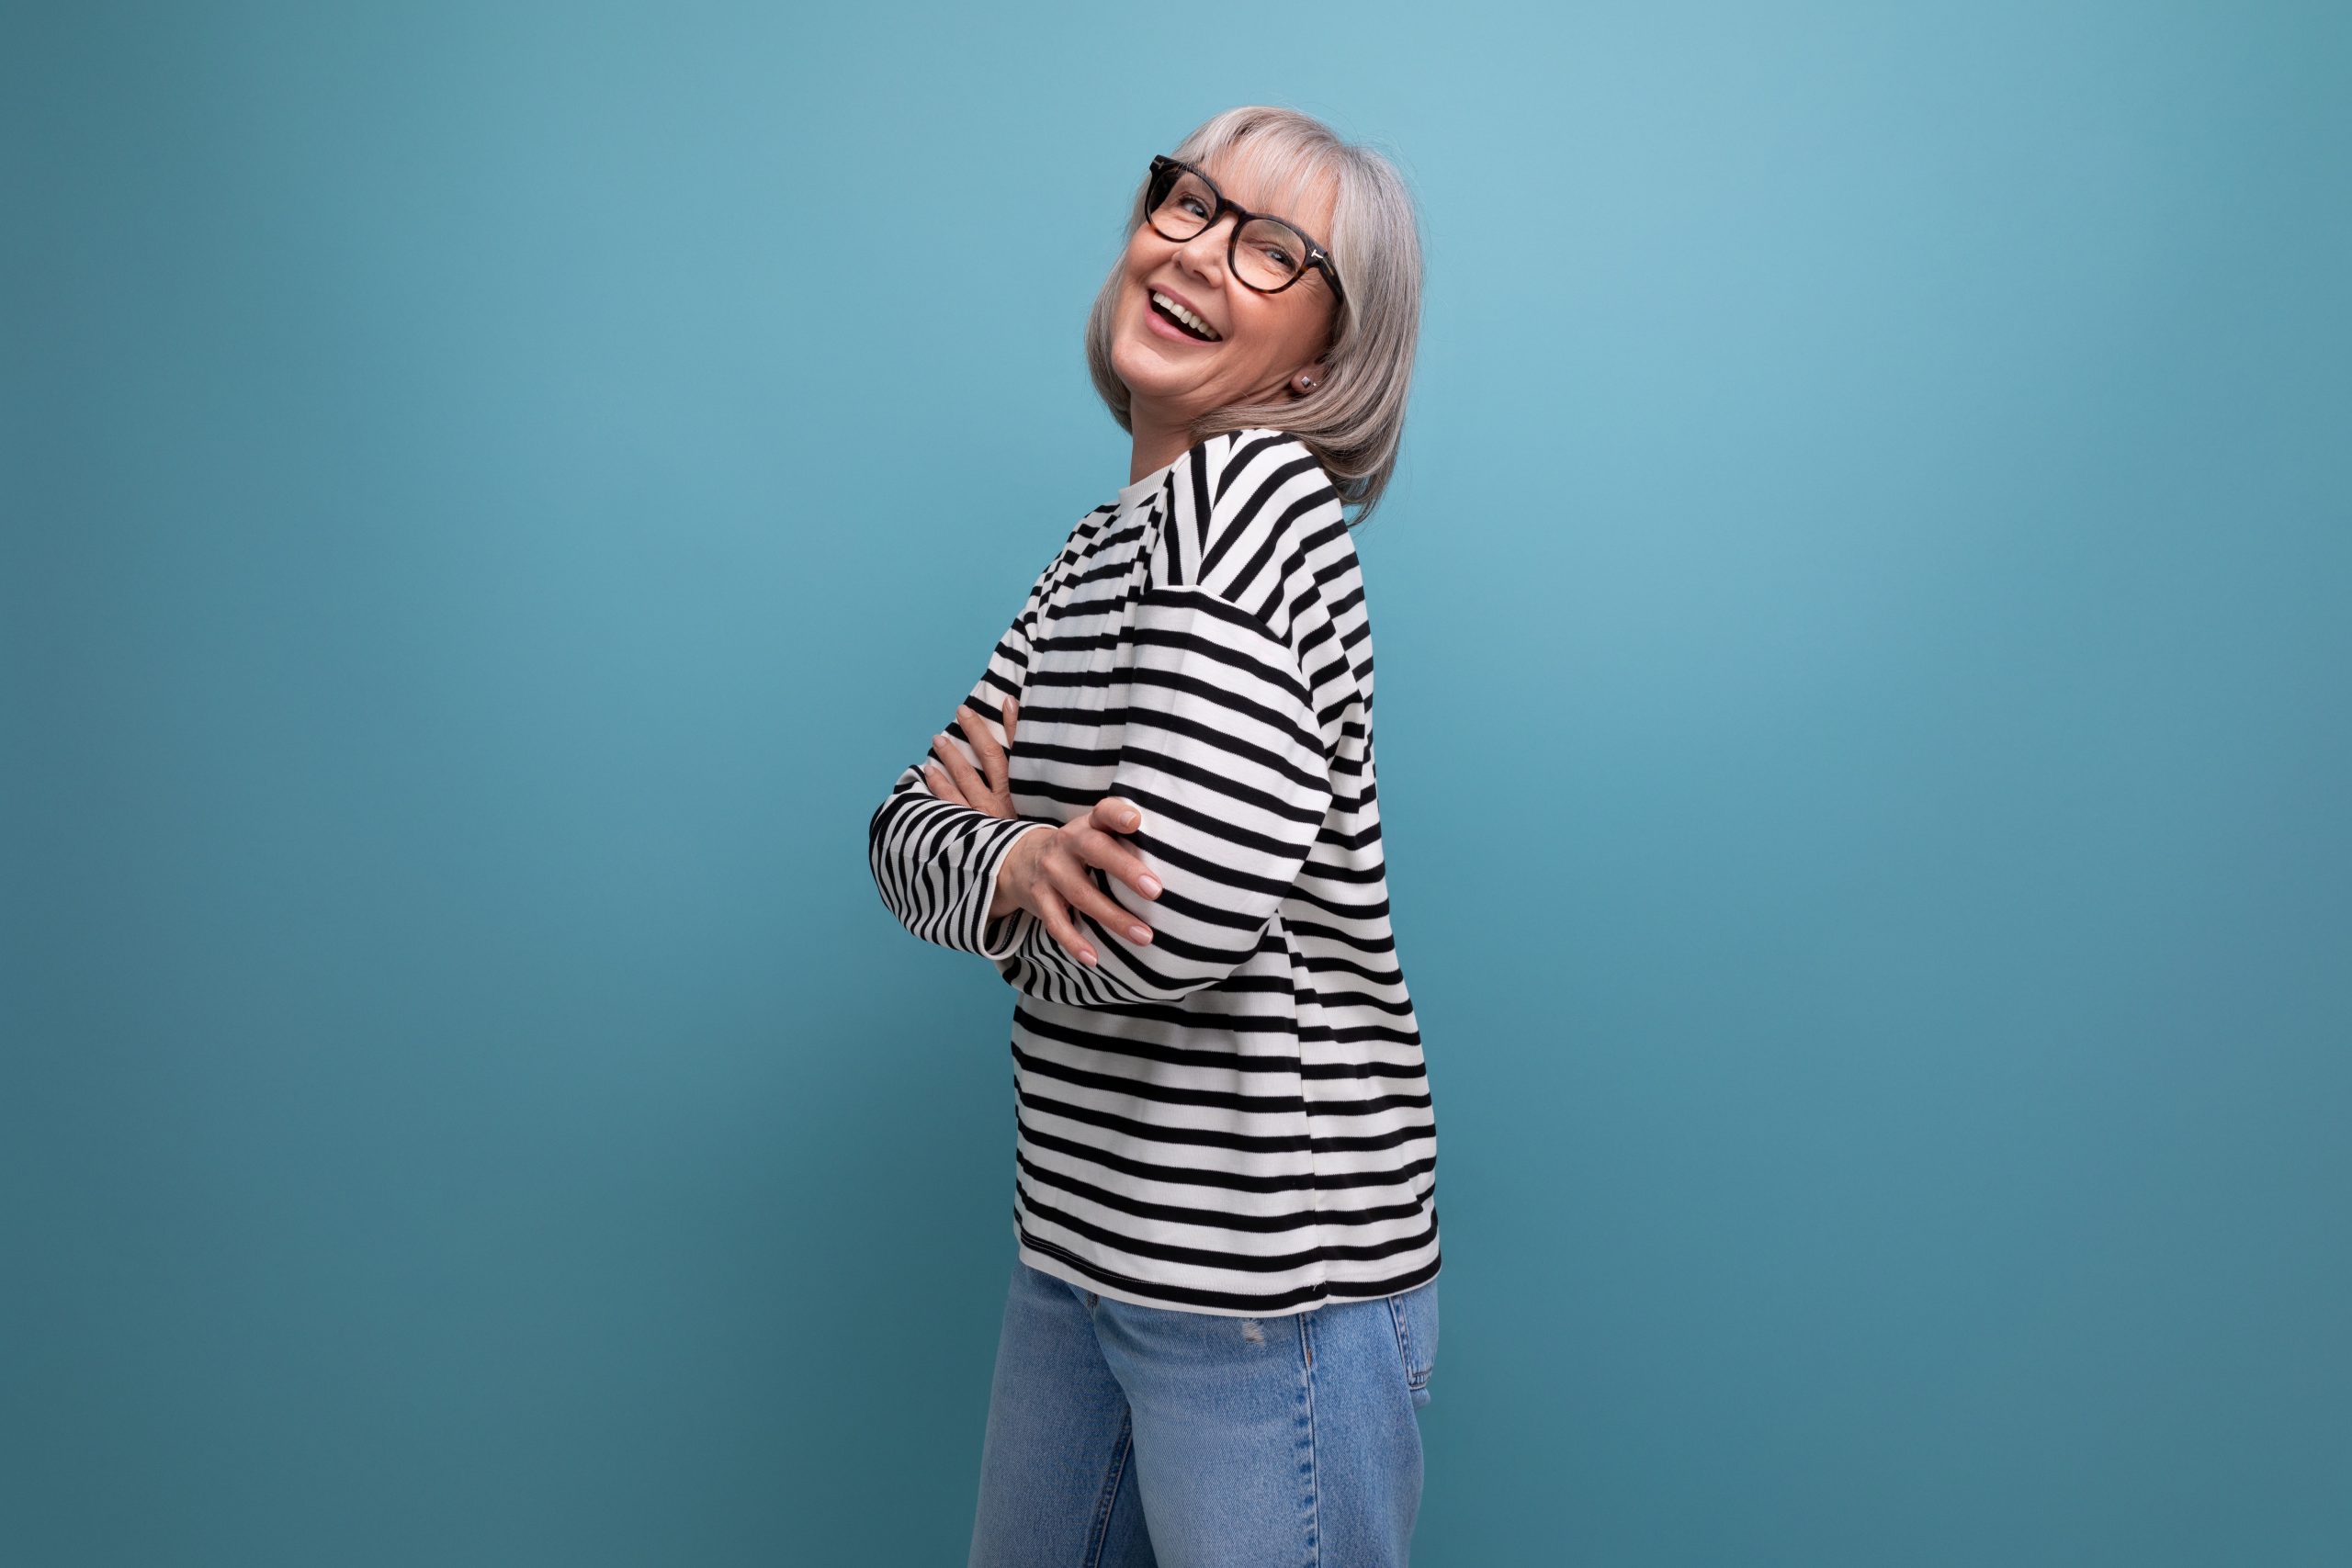 a well-groomed middle-aged woman in a fashionable image is flirting on a bright studio background